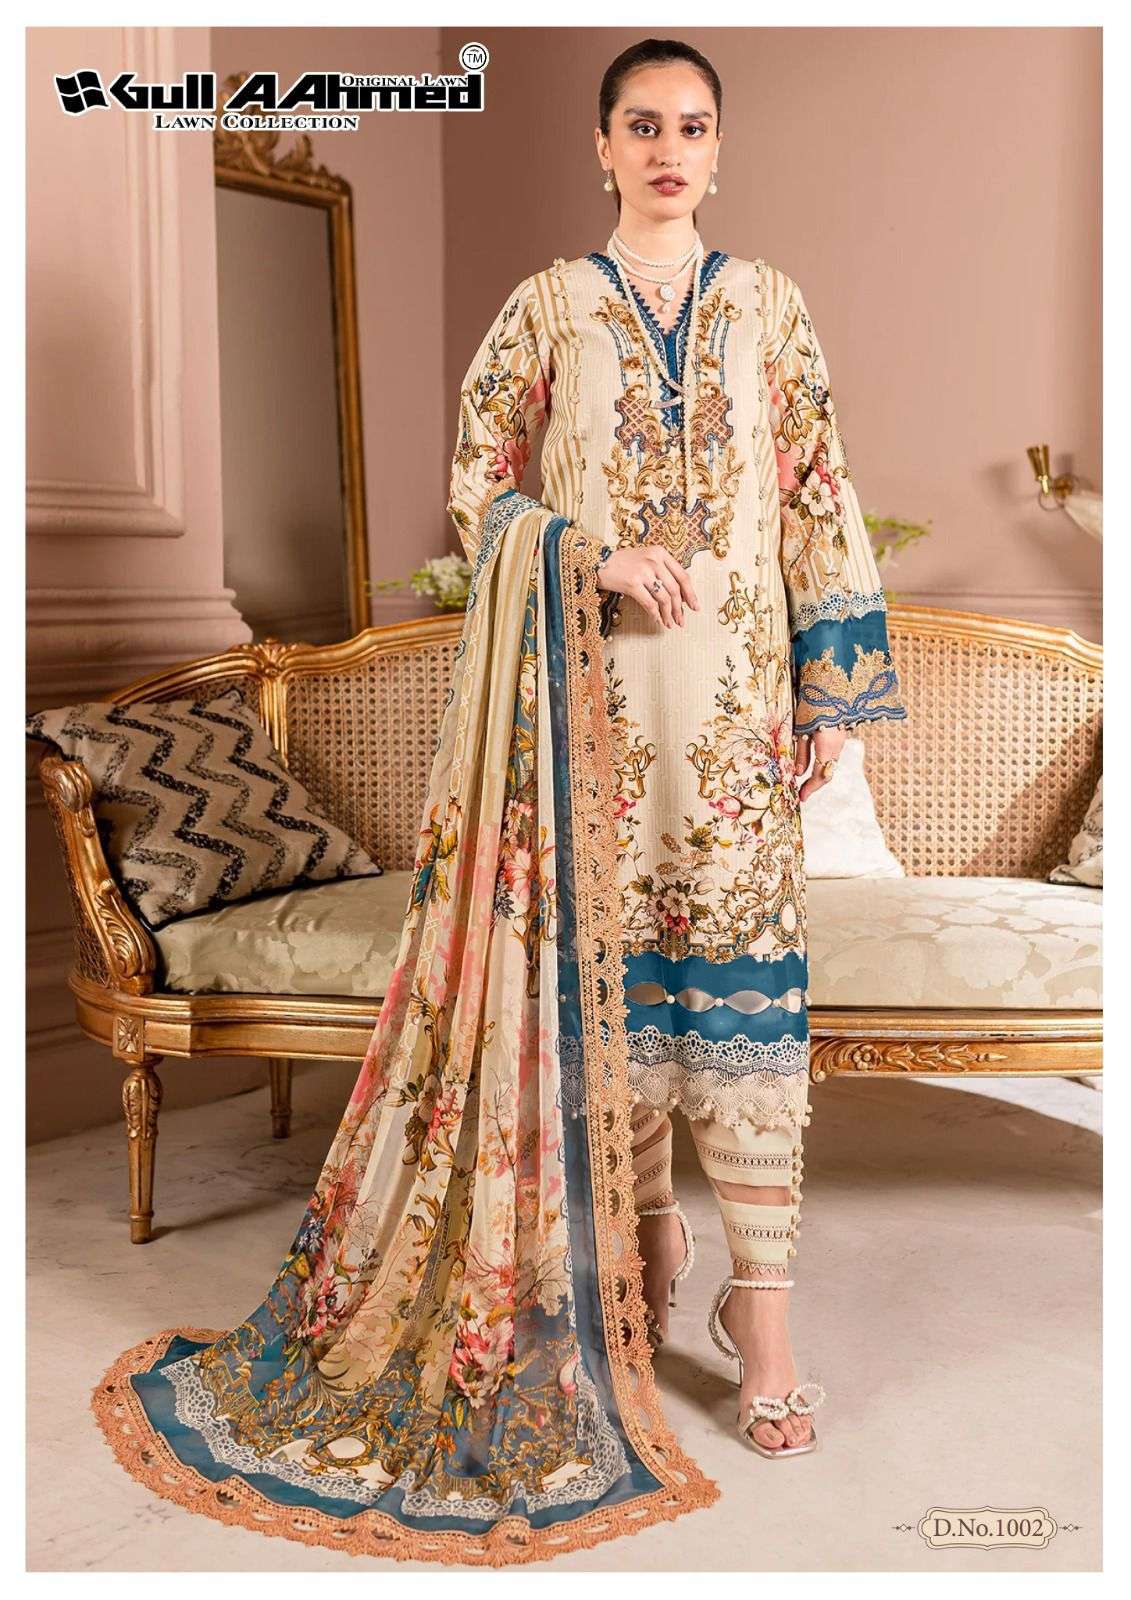 GULL AAHMED AZURE  LUXURY LAWN COLLECTION 